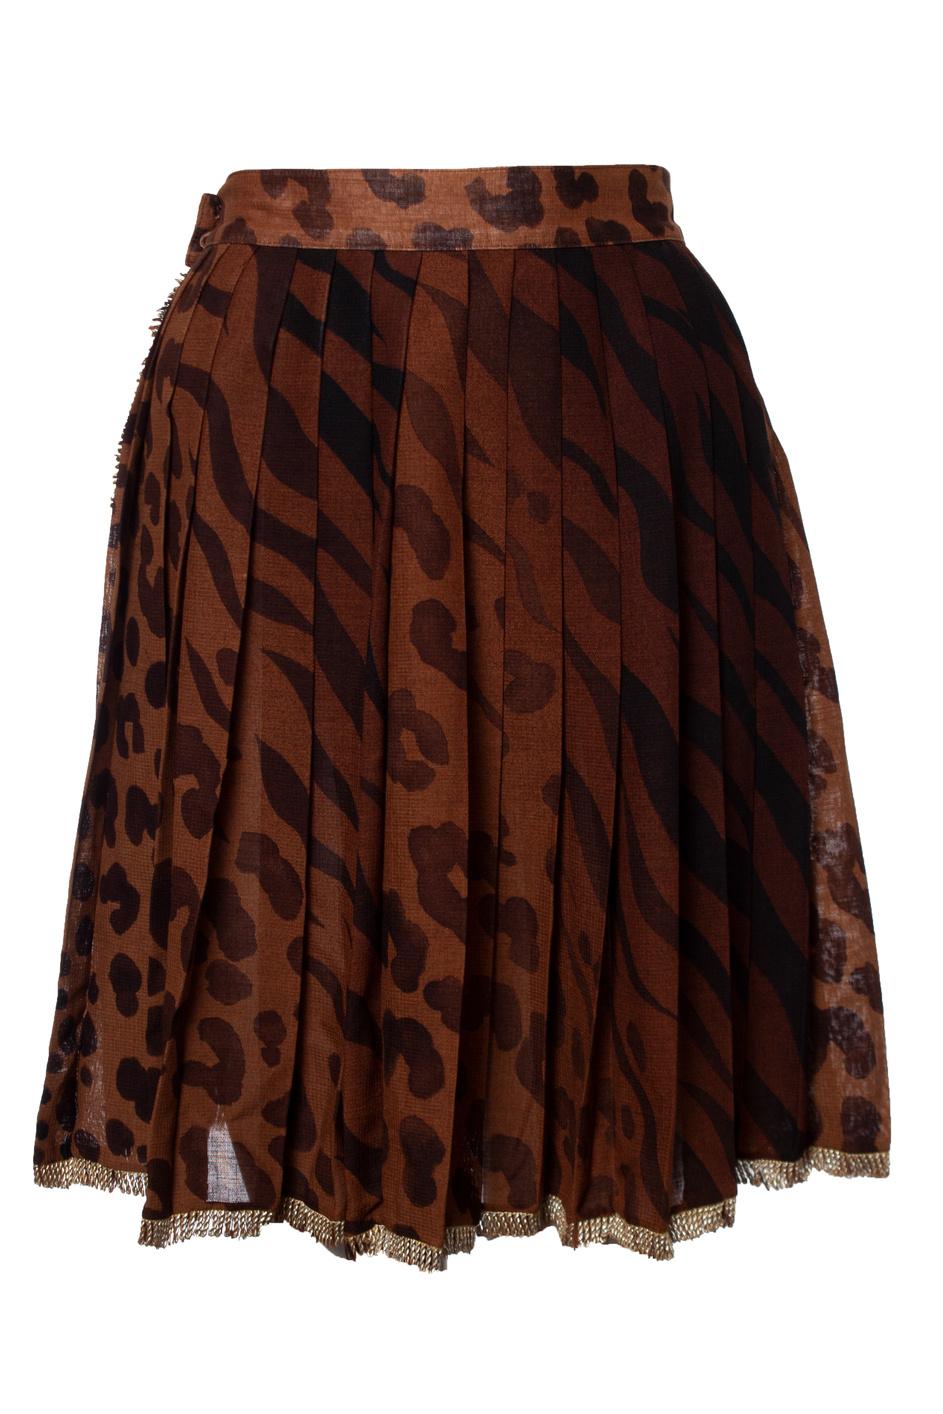 Gianni Versace Couture, Leopard printed and pleated skirt with gold fringes. The item is in very good condition.

• CONDITION: very good condition 

• SIZE: IT40 - XS 

• MEASUREMENTS: length 51 cm, width 32 cm

• MATERIAL: label removed 

• CARE: